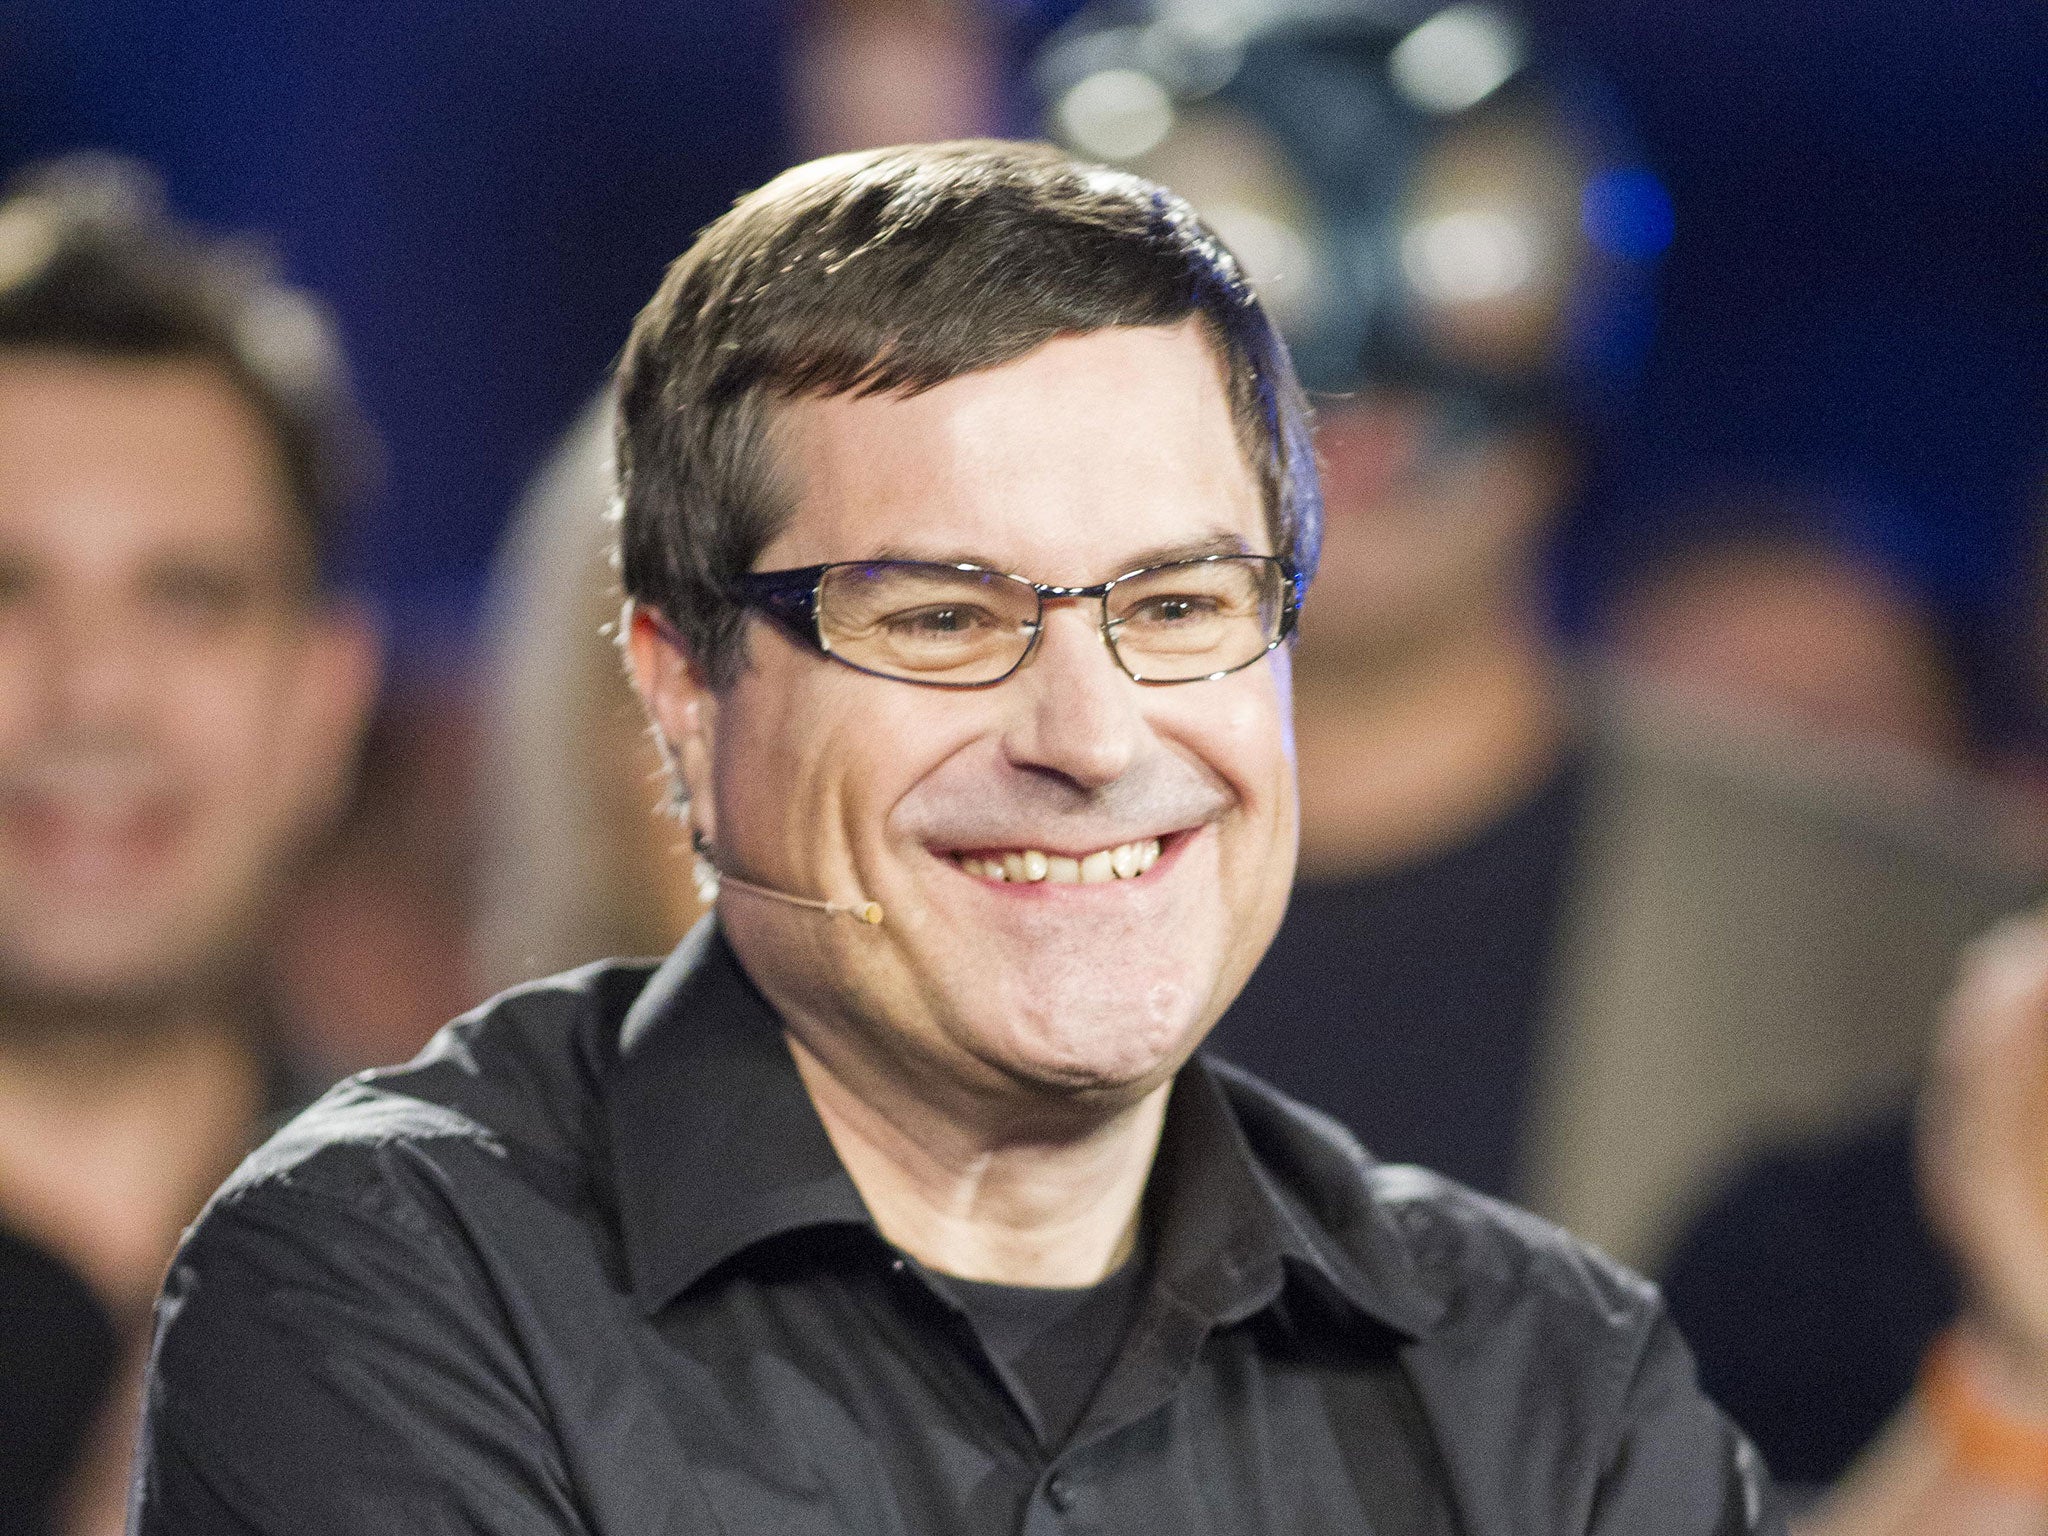 The criticism was disputed by David Braben, one of the leading figures in the British video games industry, who said that with the sector now generating £2.5bn in sales and huge tax revenues, the grants should be applauded as 'investment, not spend'